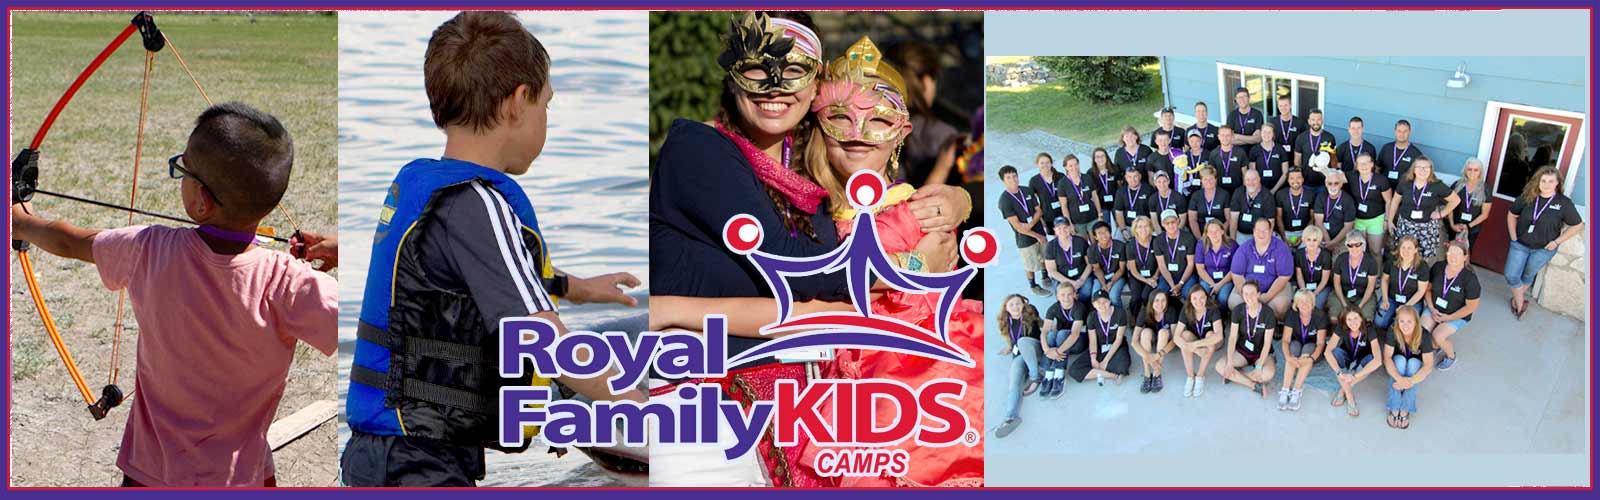 Royal Family Kids Camps